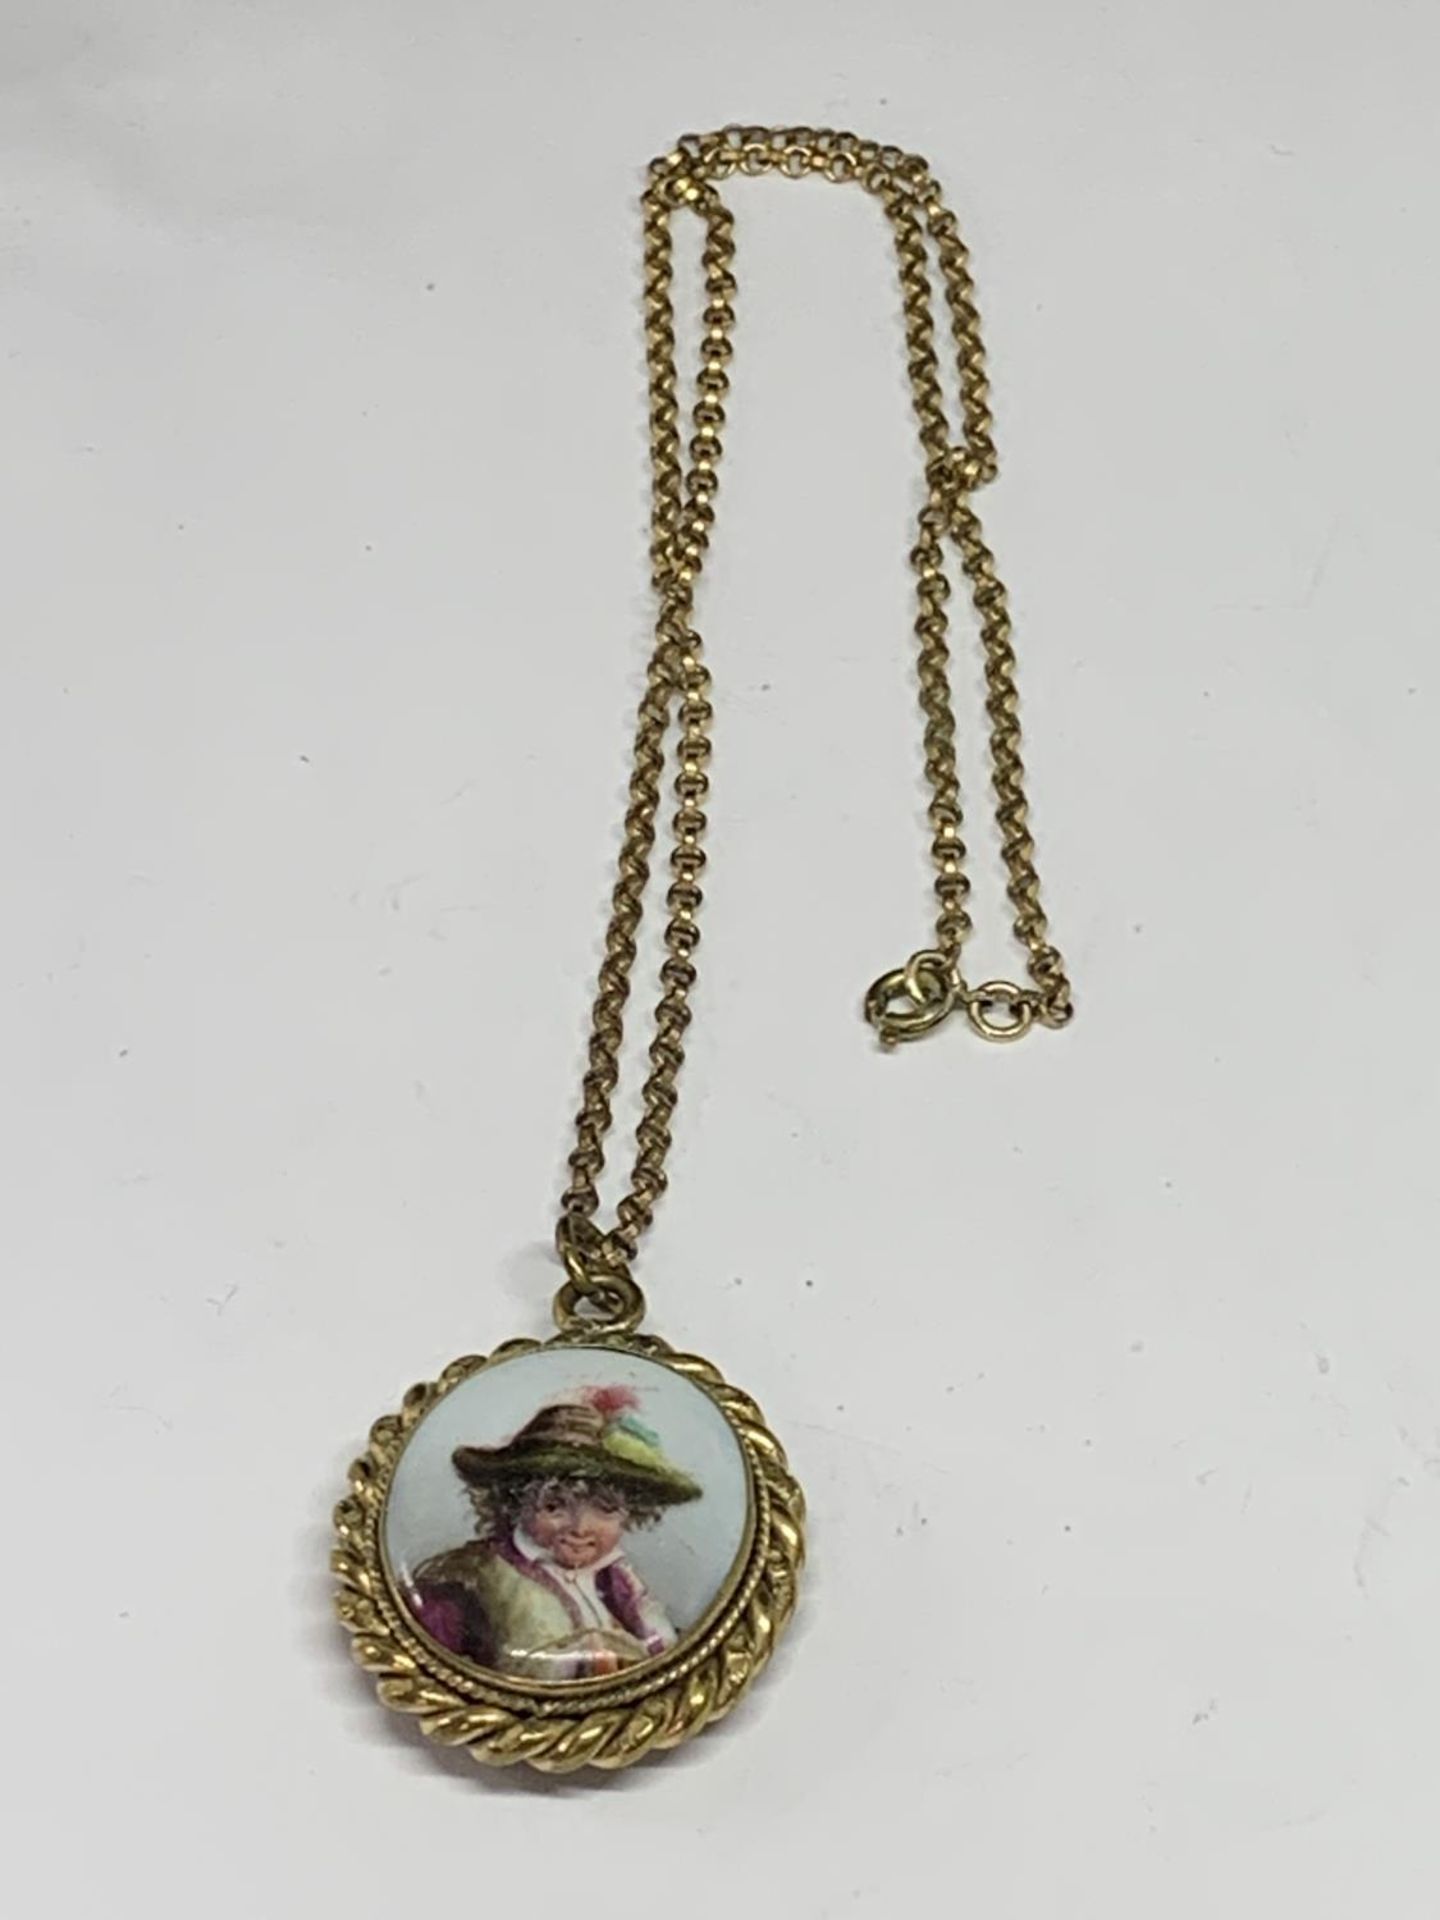 A VICTORIAN LOCKET WITH A CERAMIC FRONT WITH A PICTURE OF A YOUNG BOY